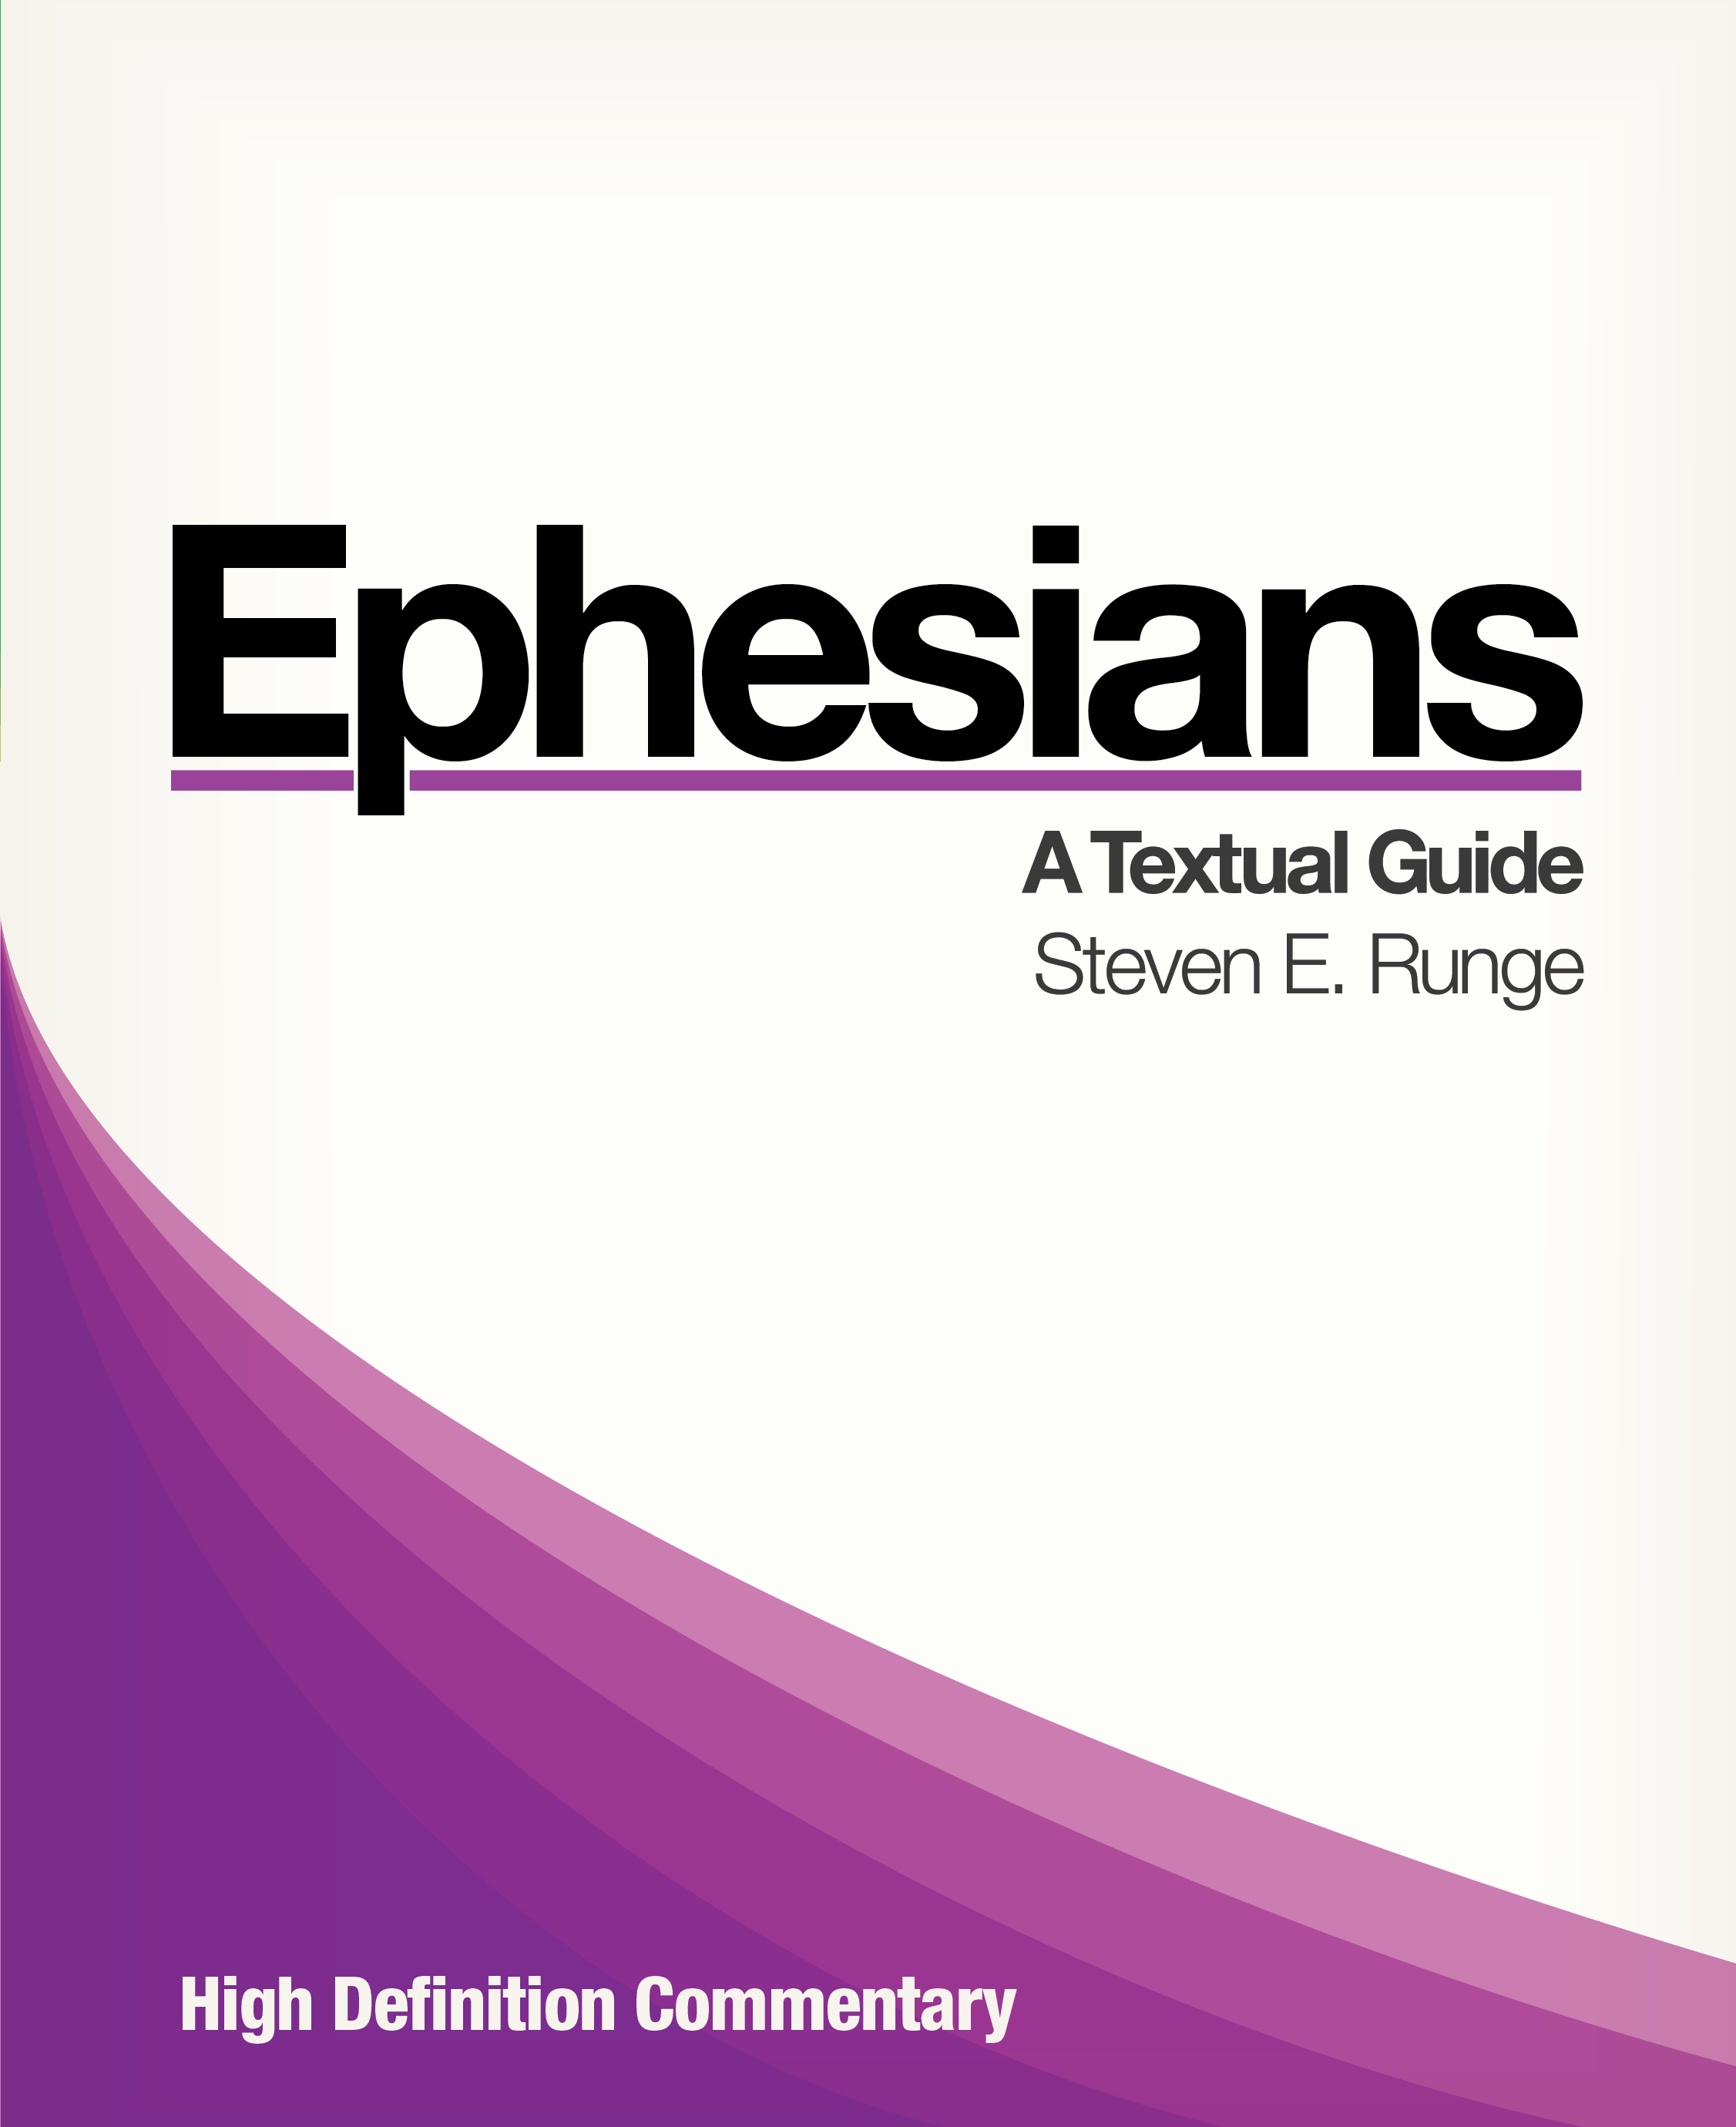 High Definition Commentary: Ephesians